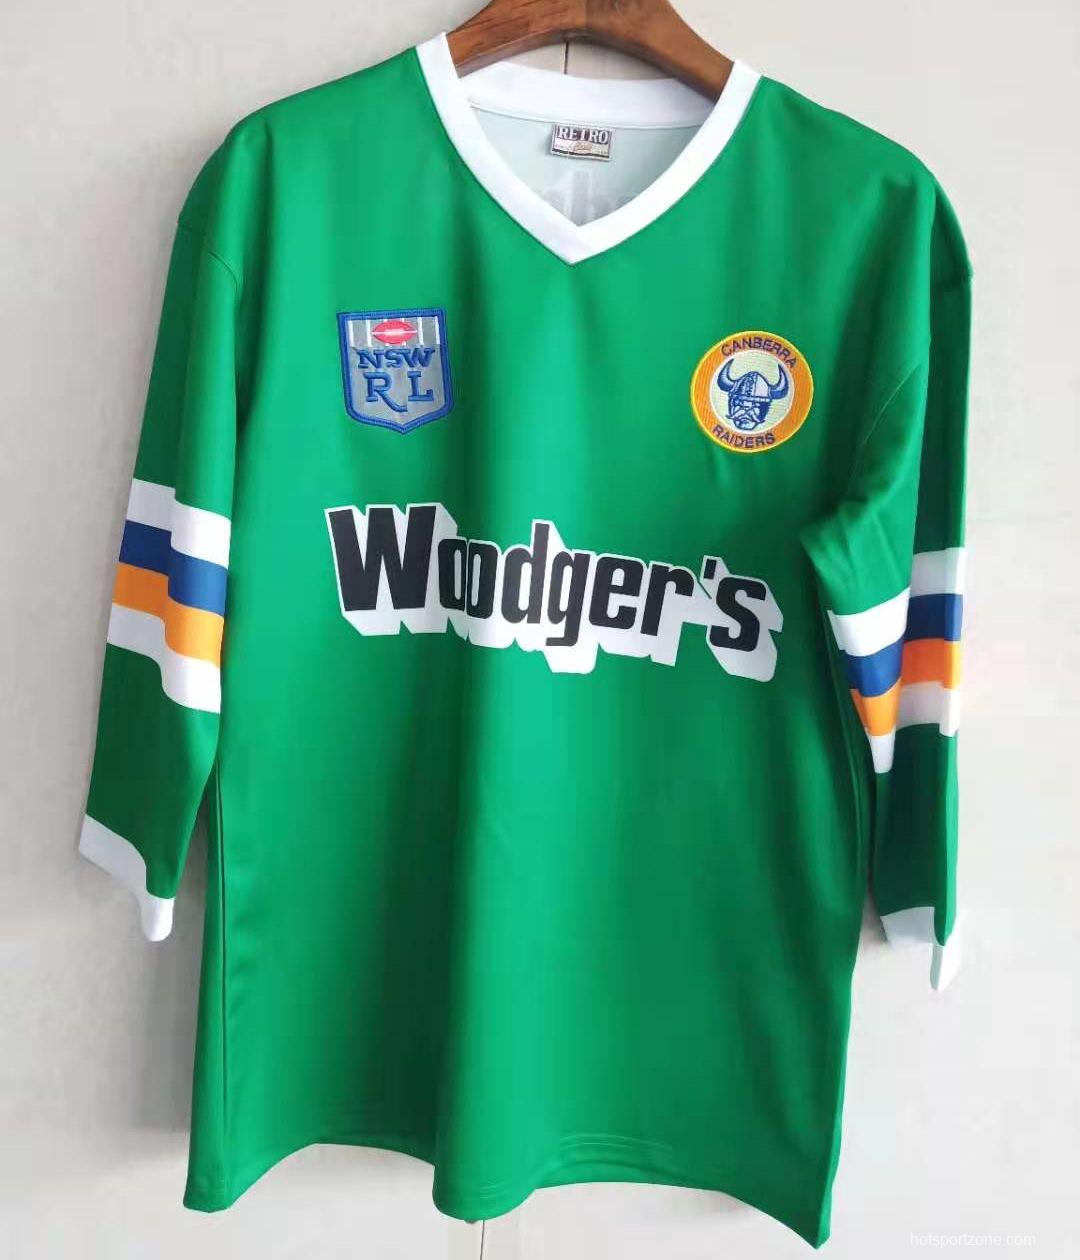 Canberra Raiders 1989 Adult Retro Rugby Jersey